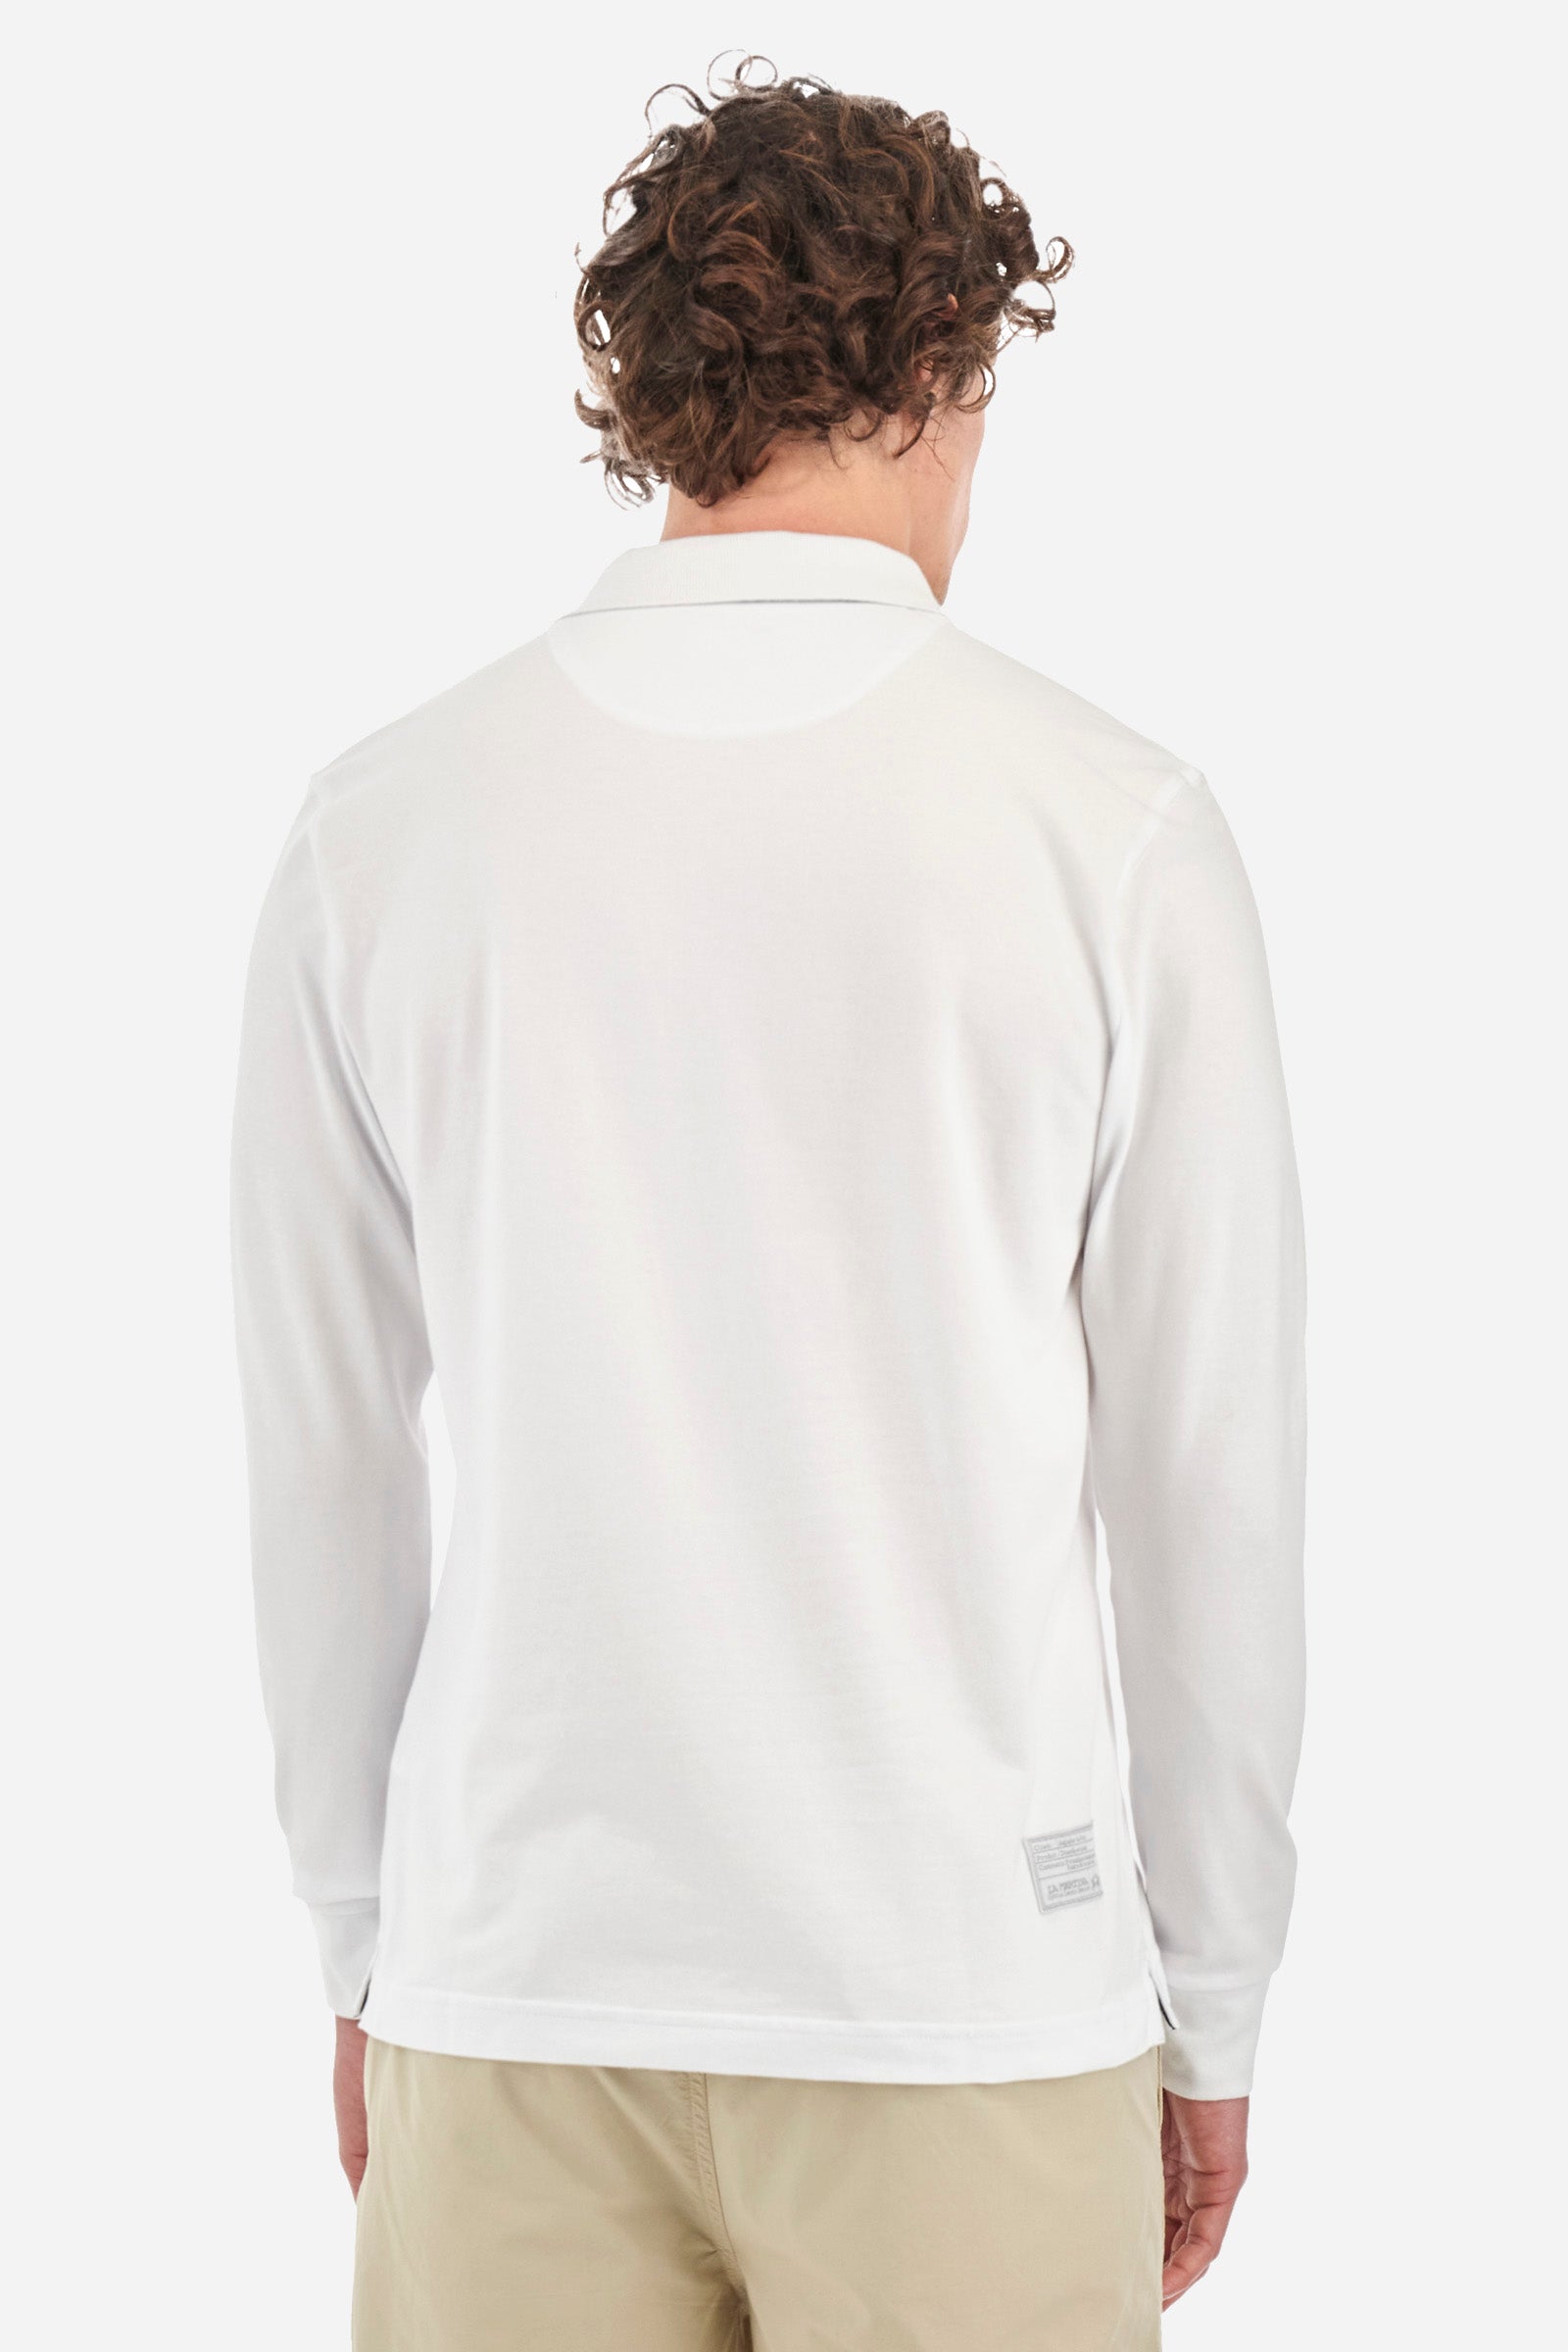 Men's polo shirt in a regular fit - Milo